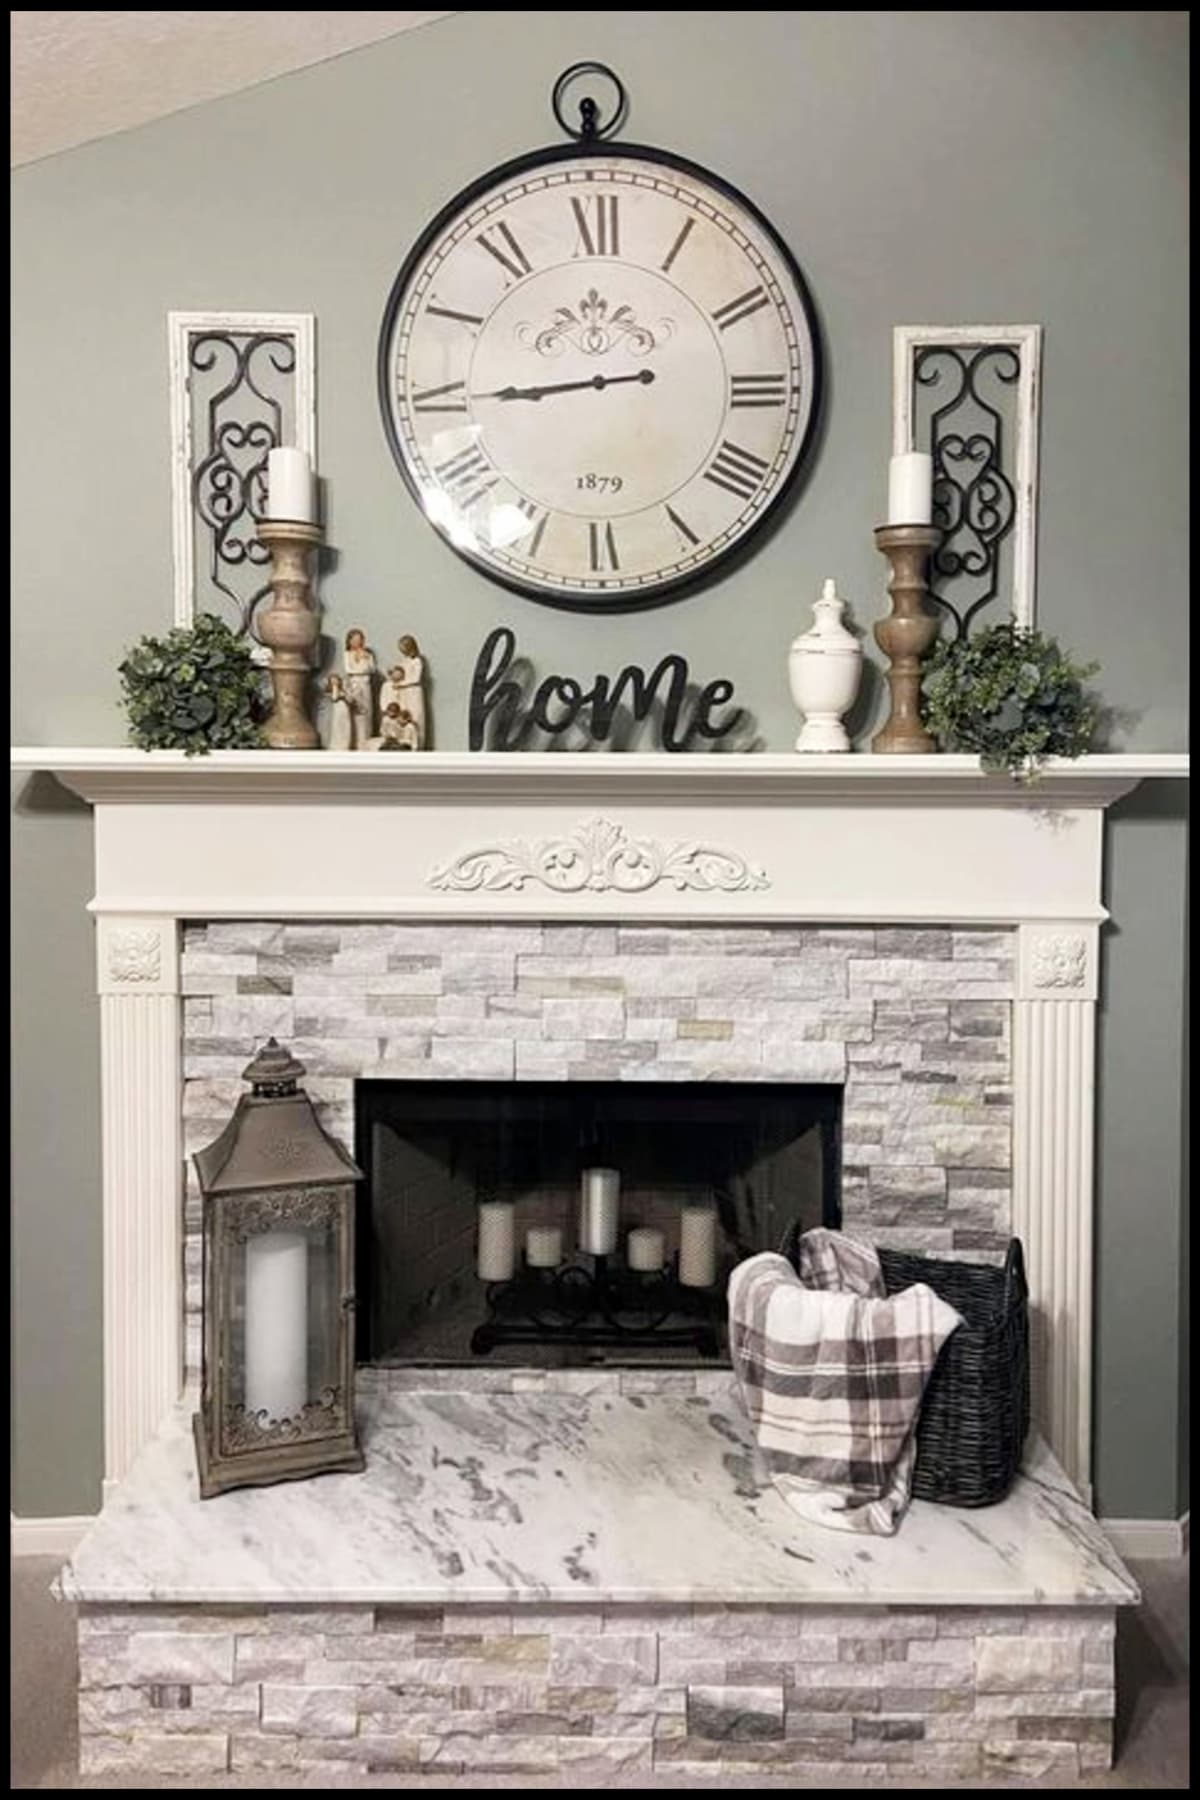 farmhouse fireplace ideas with clock over mantel, candle, baskets and throw blankets on hearth